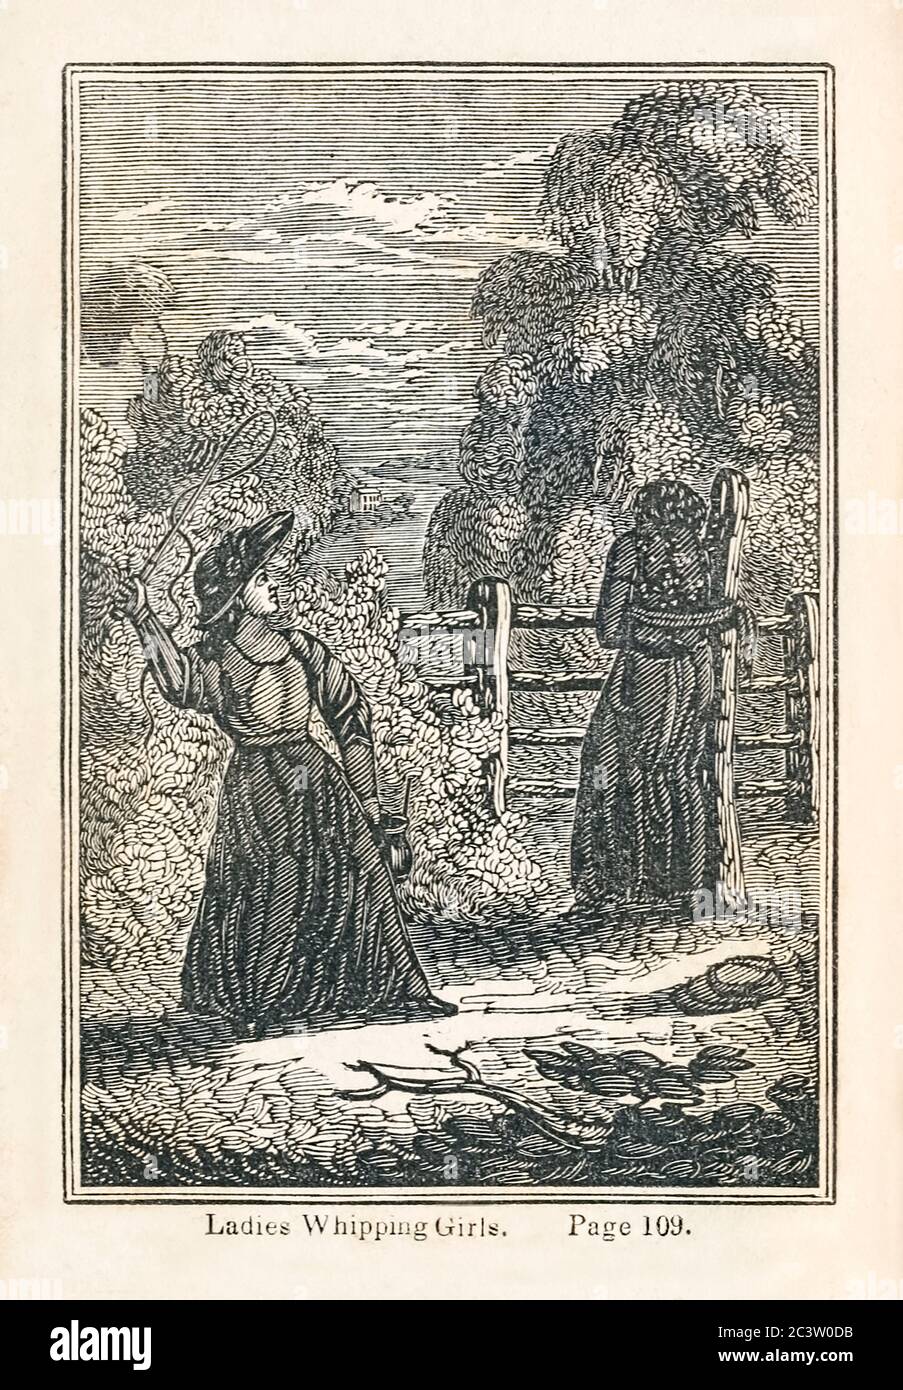 “Ladies whipping girls” illustration from ‘Picture of slavery in the United States of America’ by George Bourne (1780-1845) a founder of the American Anti-Slavery Society, Published in 1834 the book detailed the trade, abuse and corrupt life styles of those involved in slavery to further the abolitionist cause. Stock Photo